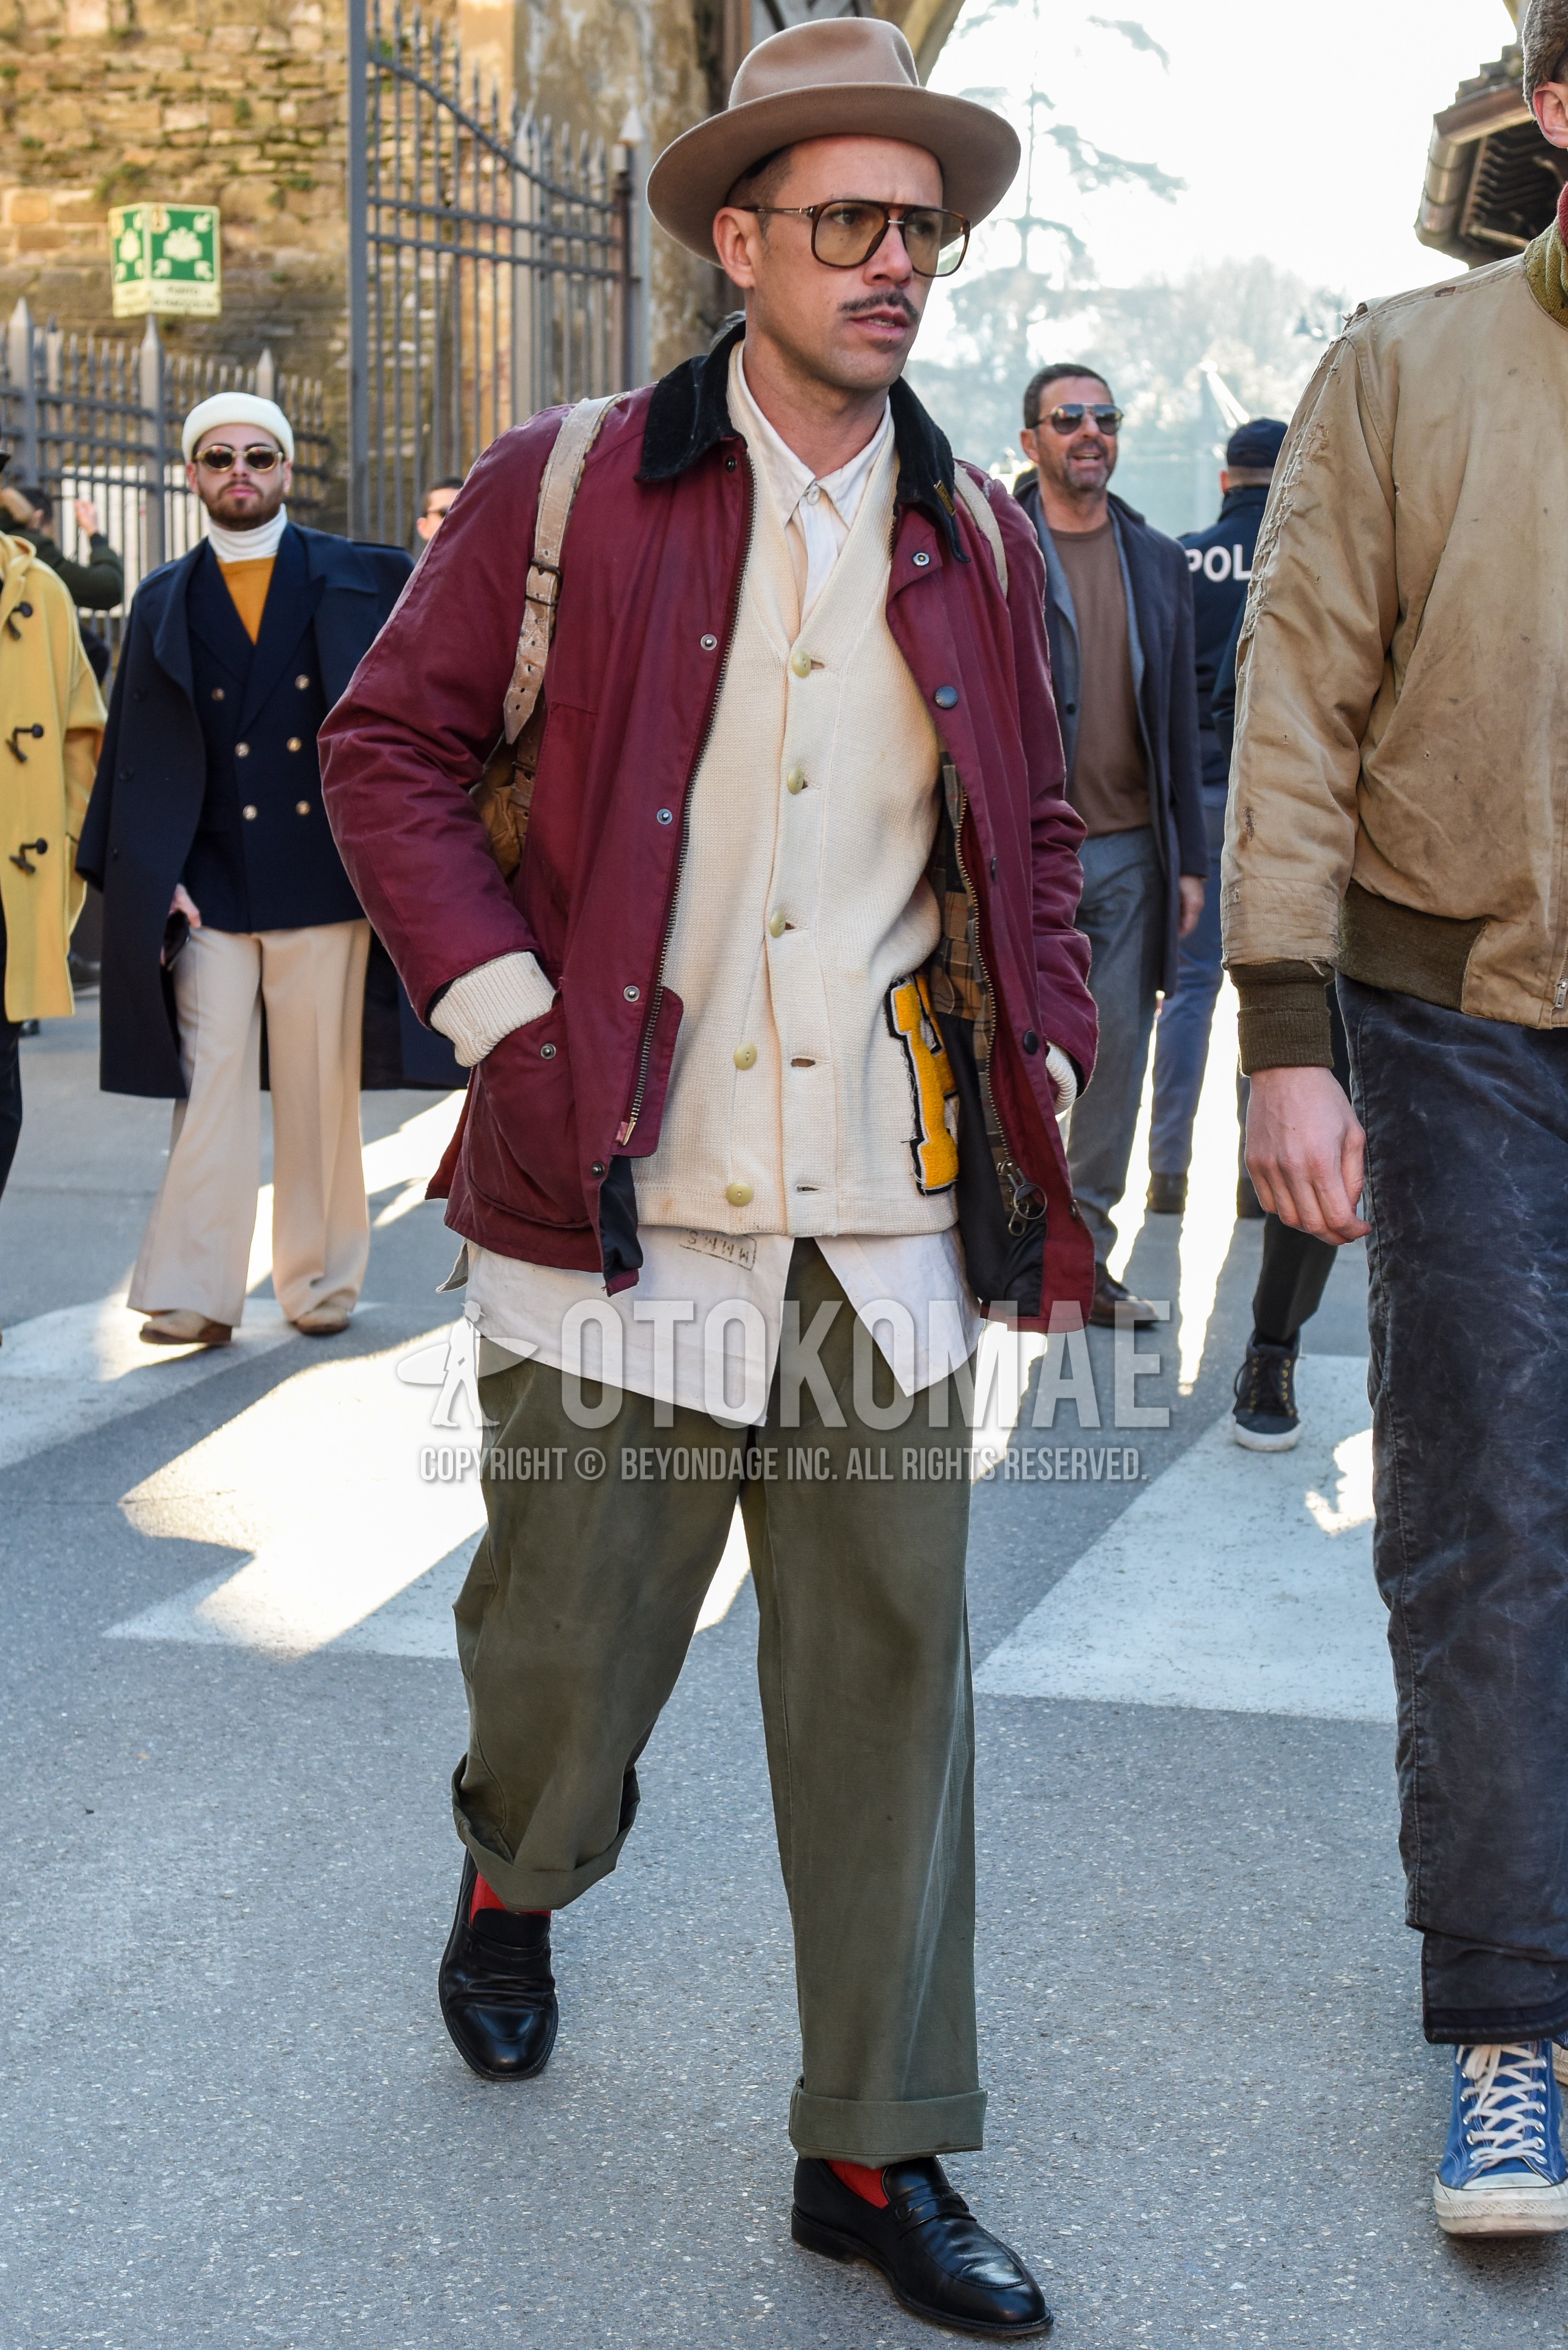 Men's autumn winter outfit with beige plain hat, brown tortoiseshell sunglasses, red plain field jacket/hunting jacket, white lettered cardigan, white plain shirt, olive green plain chinos, orange plain socks, black coin loafers leather shoes.